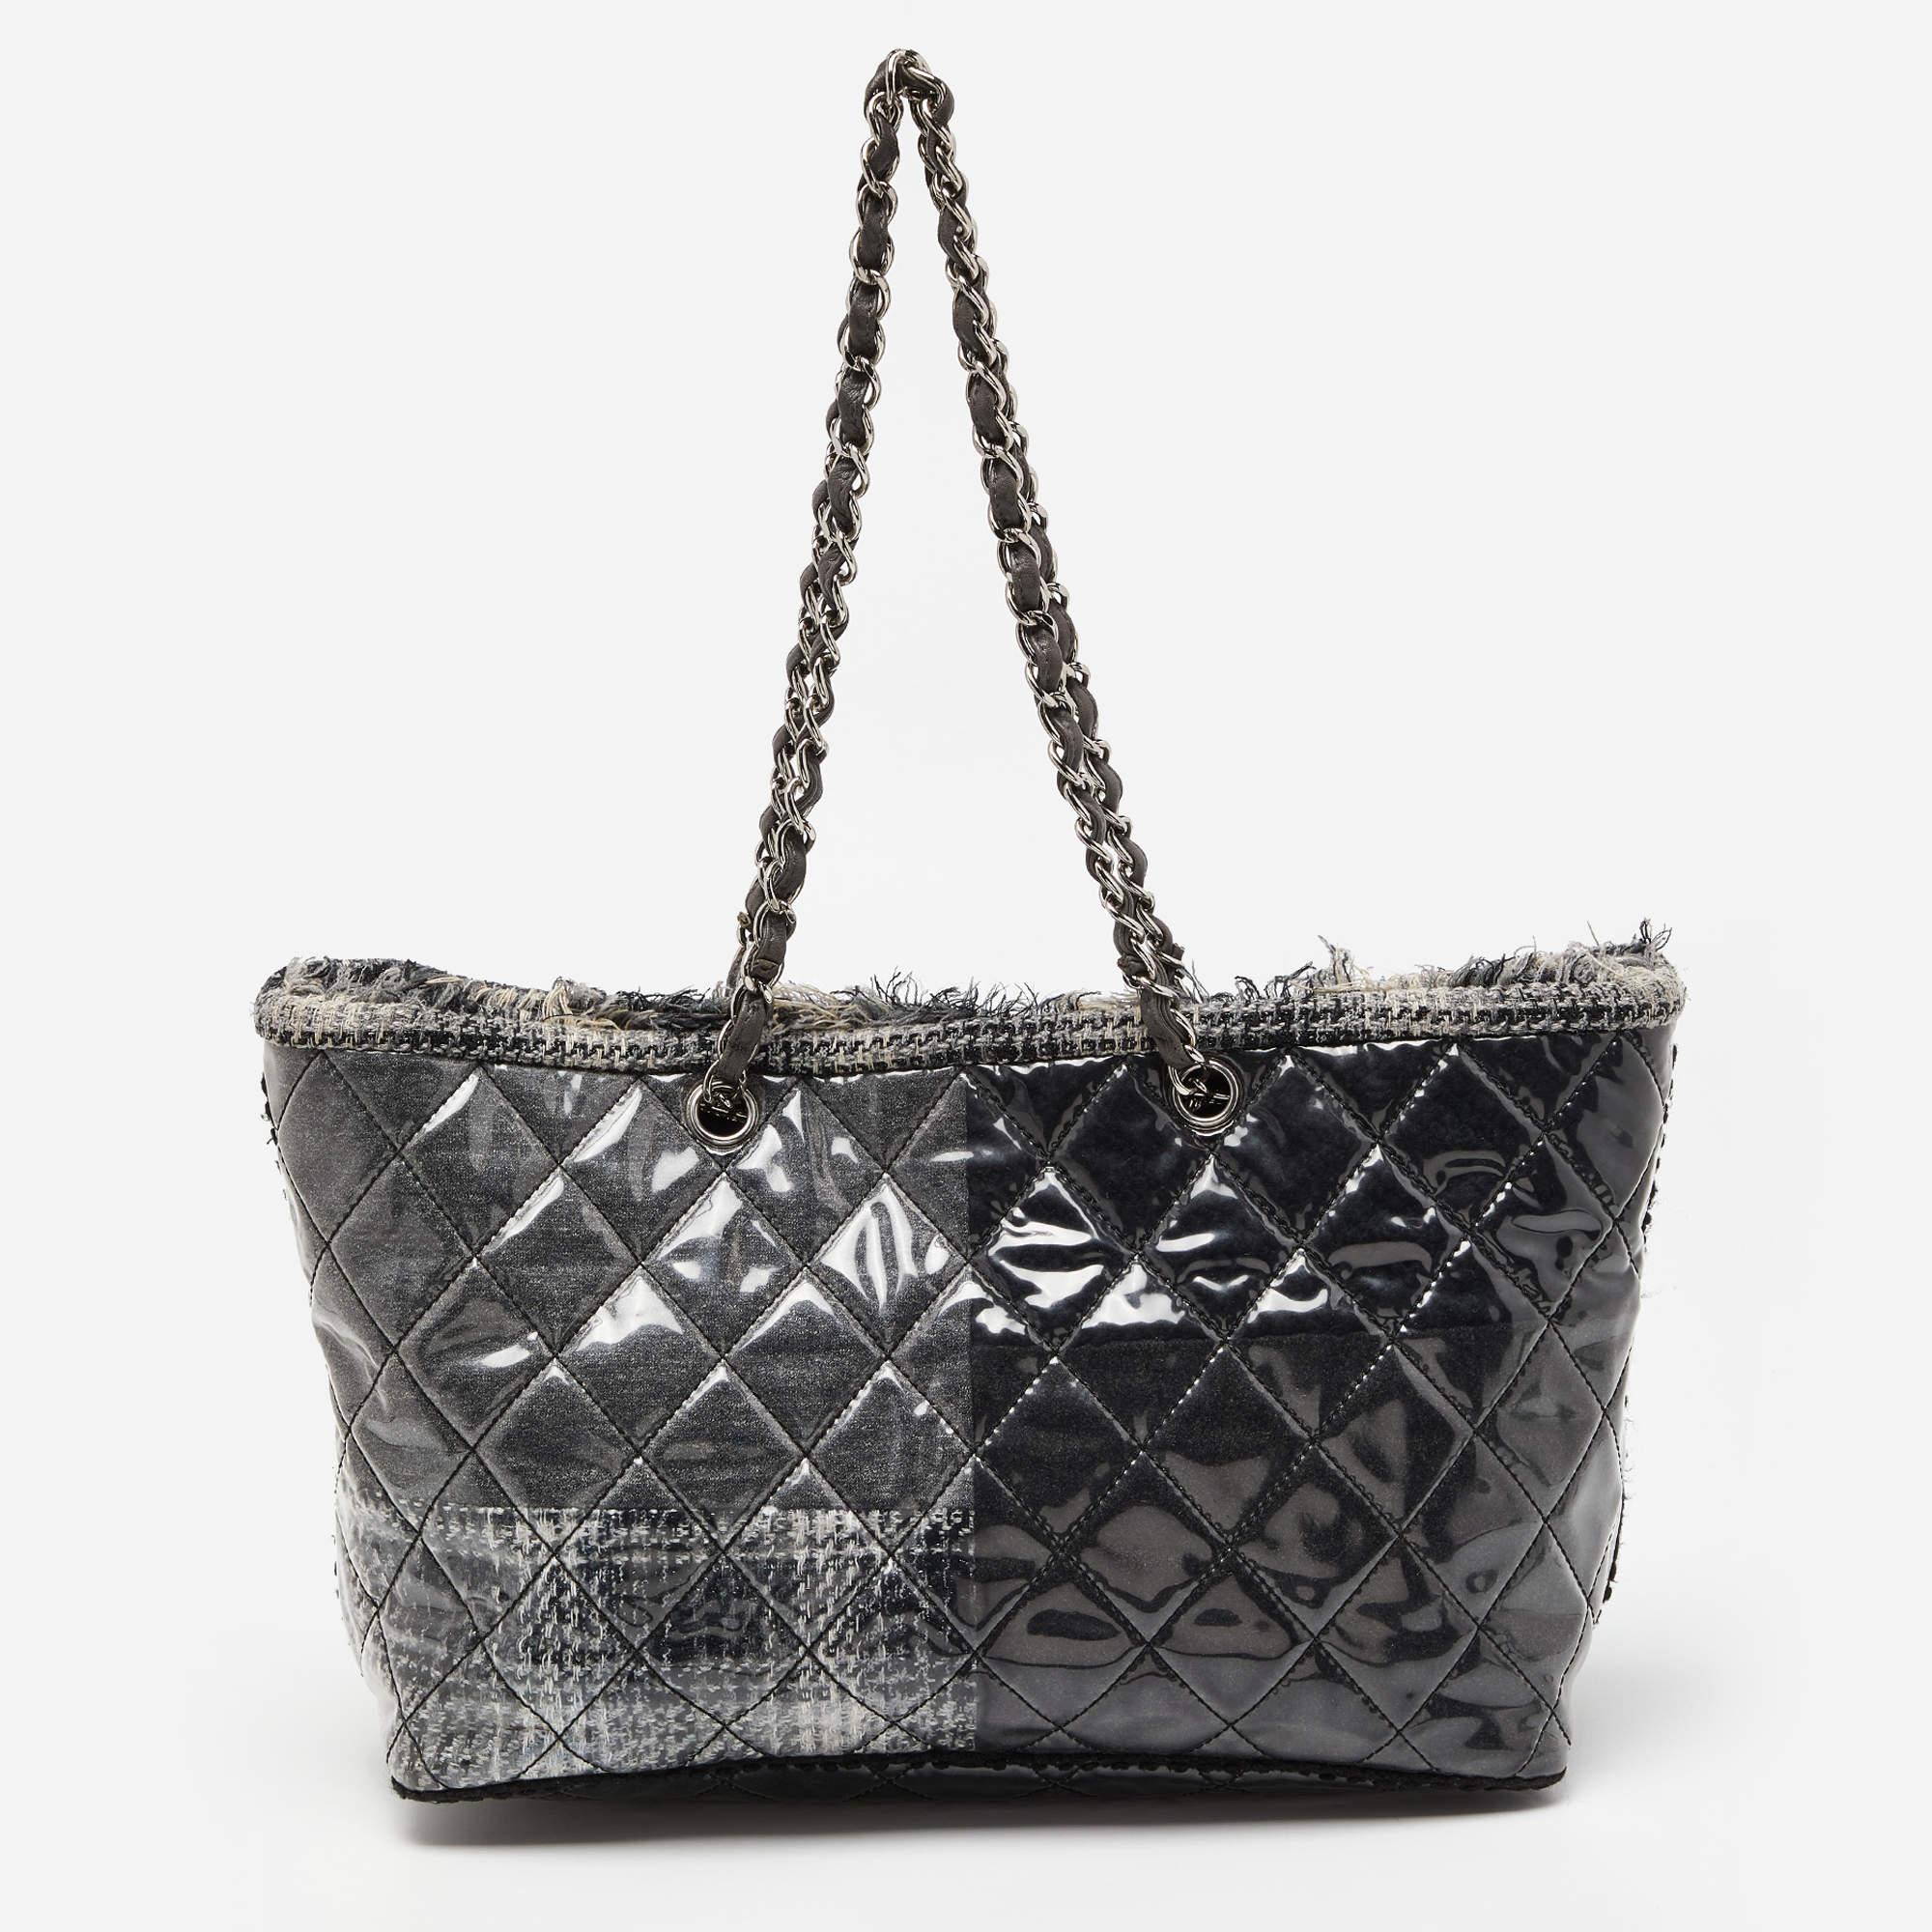 Designed in an effortlessly chic and minimally glamorous style with an everyday functional utility and spacious interior, this Chanel bag is a hard one to miss. Crafted in vinyl and tweed, this beautiful bag features quilting all over and the